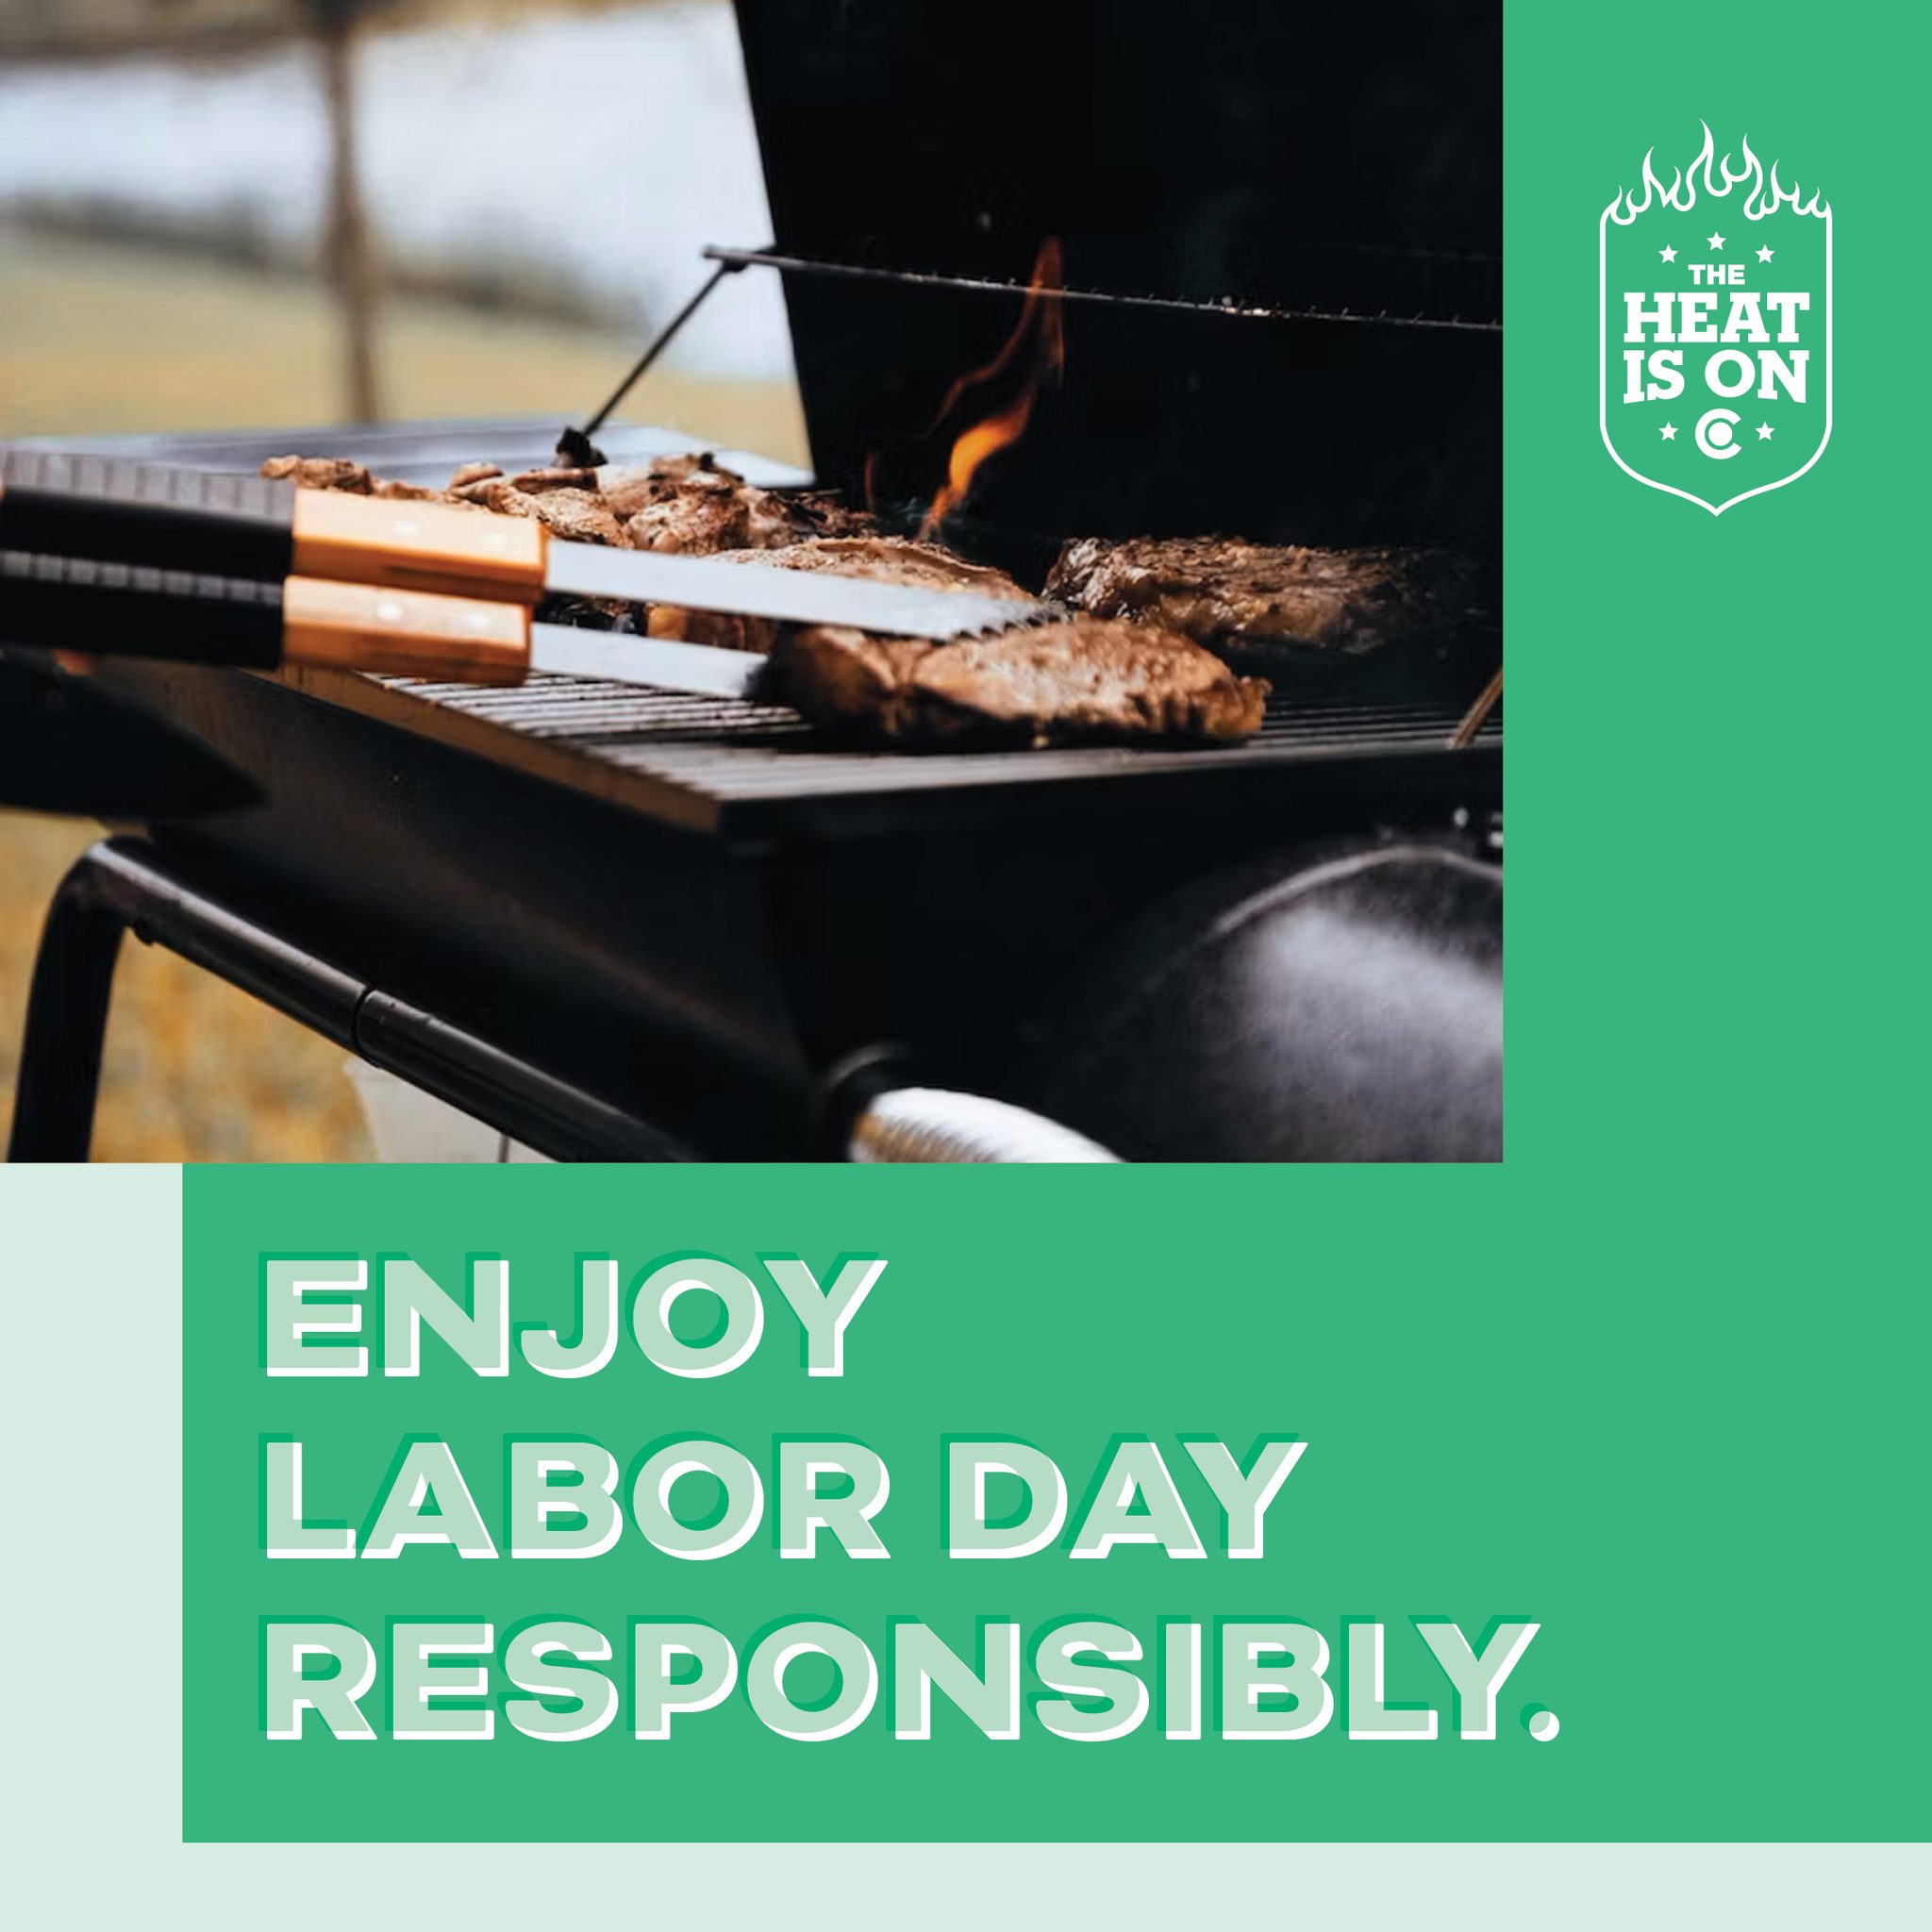 The Heat Is On Labor Day graphic.jpg detail image